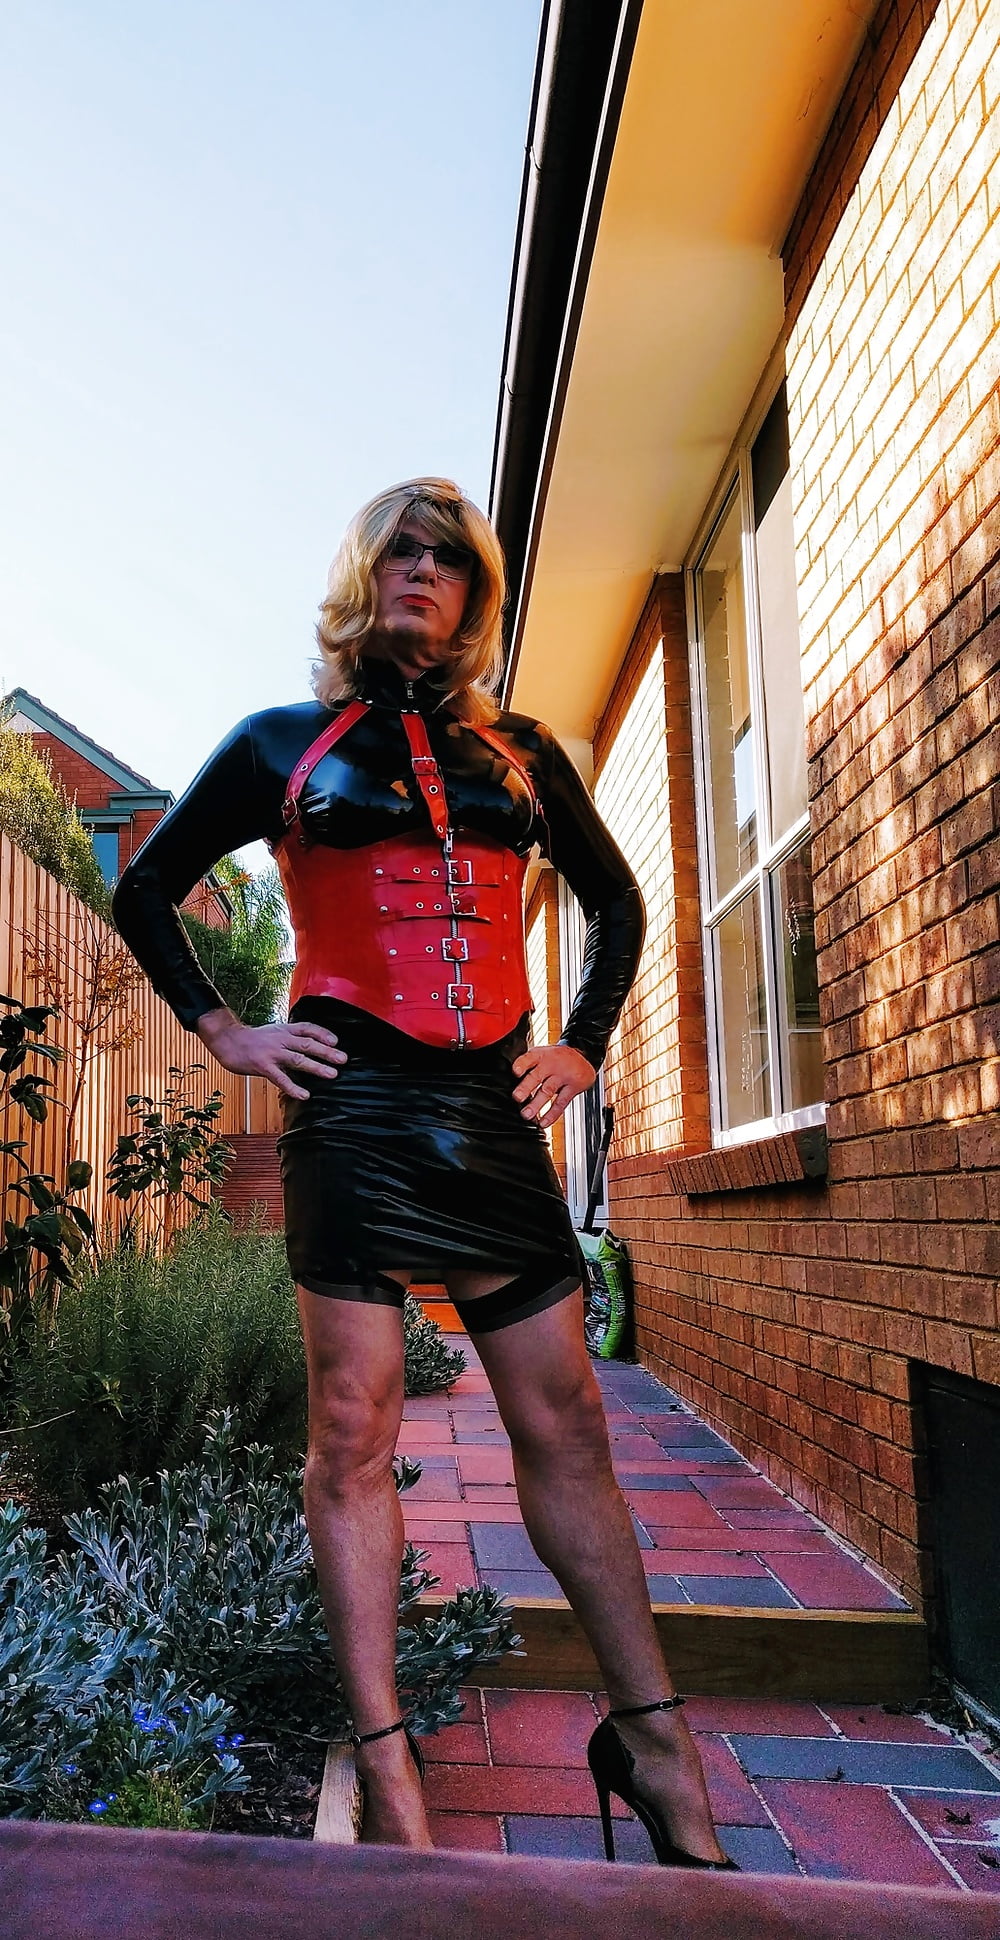 New latex skirt on a sunny Melbourne day #107021280